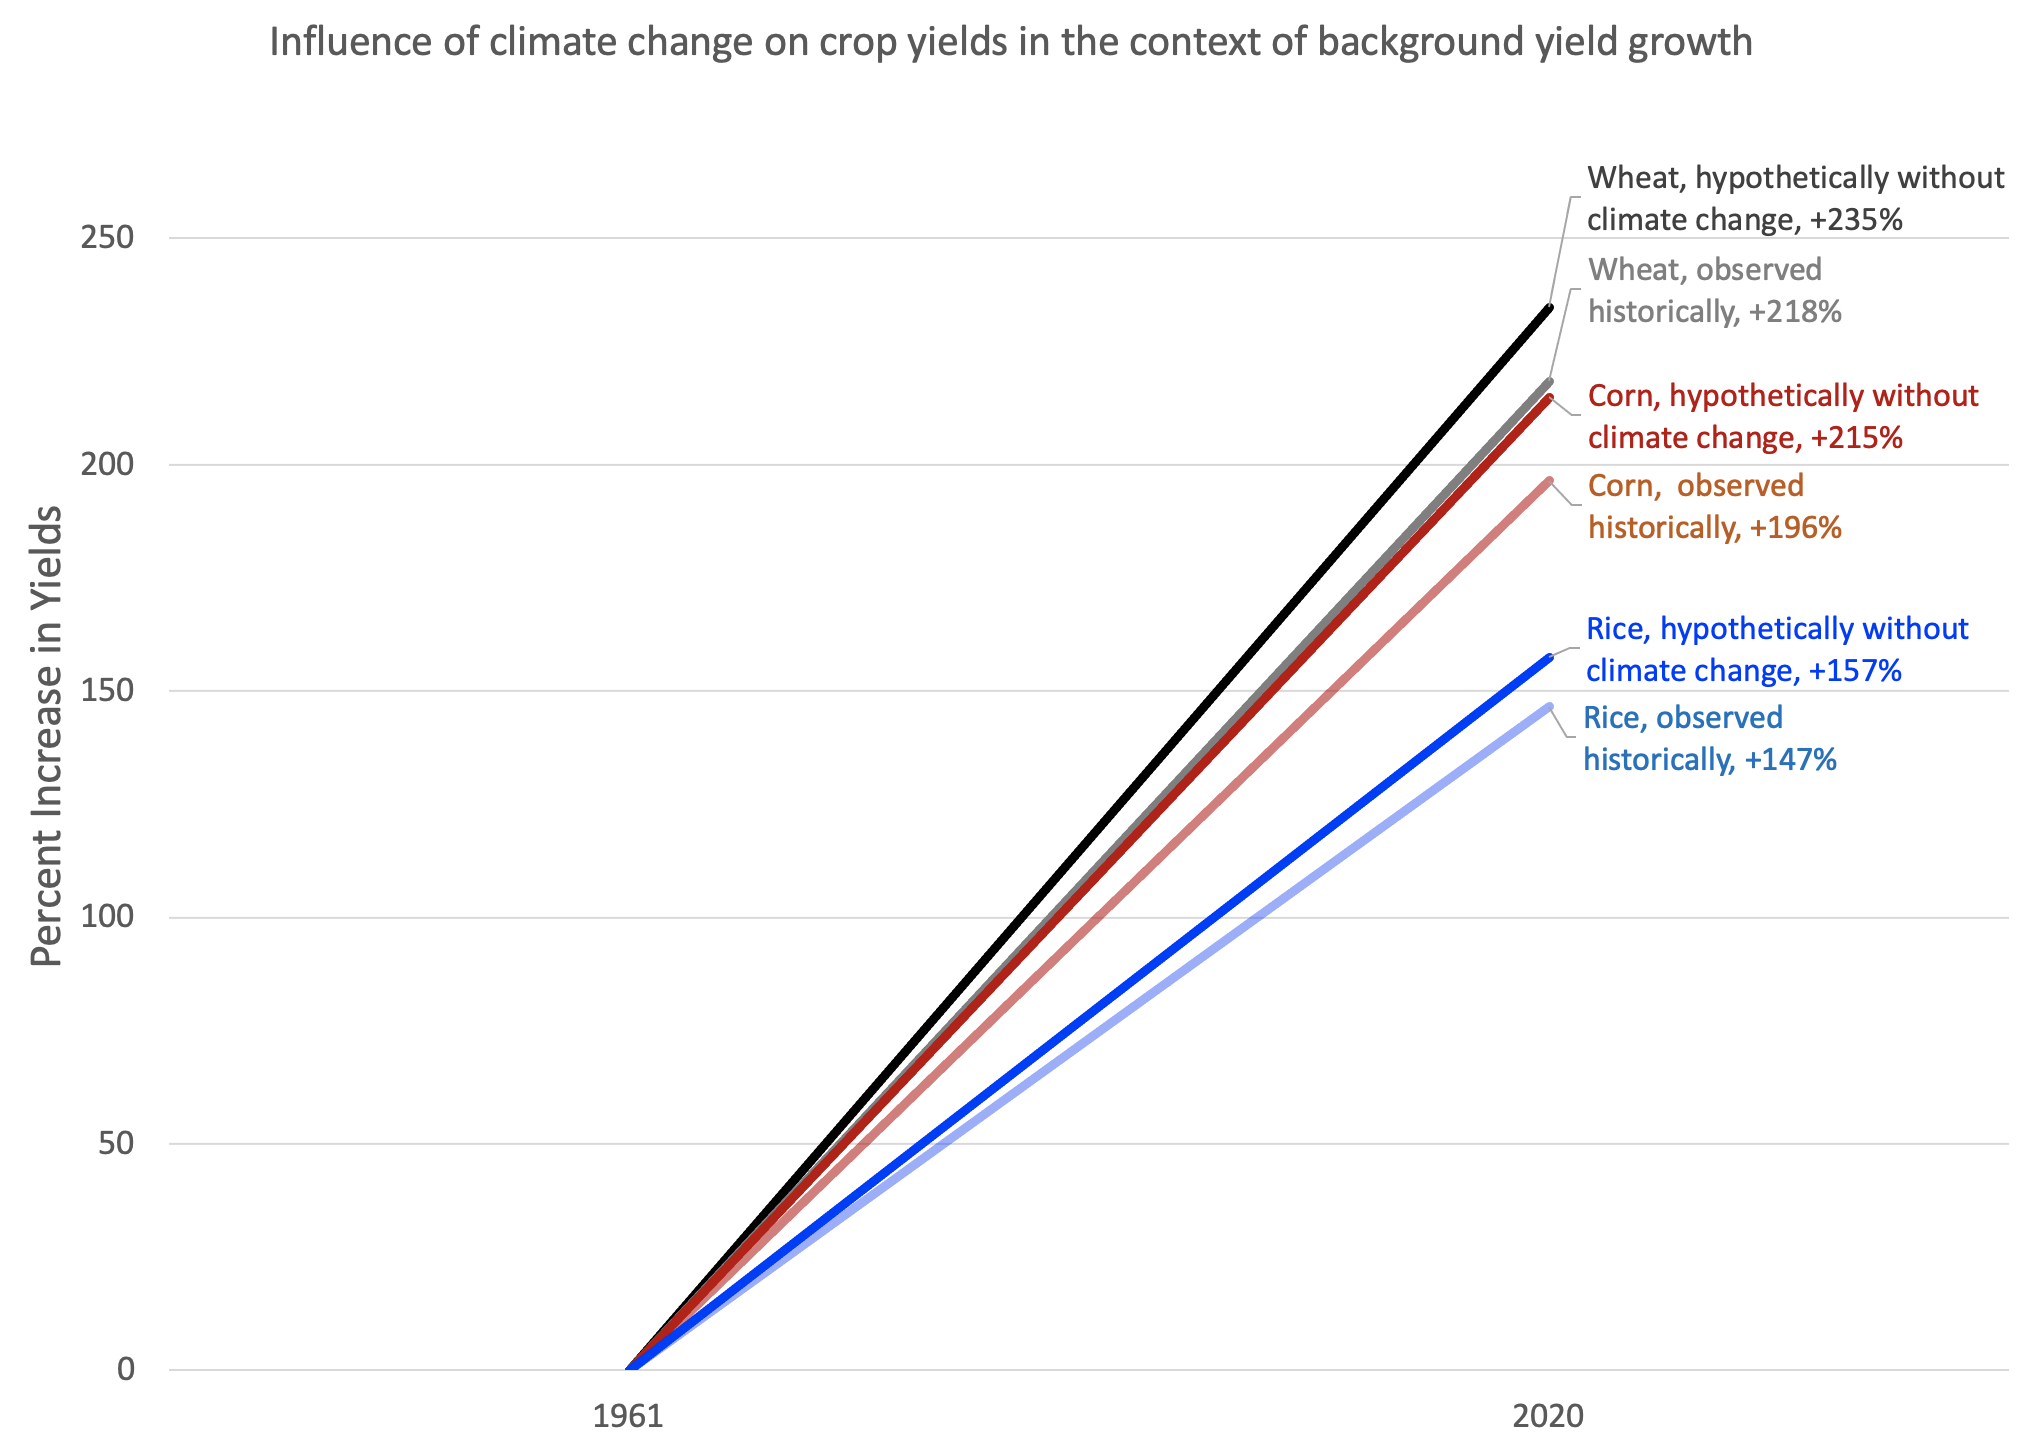 Influence of Climate Change on Crop Yields in the Context of Background Yield Growth